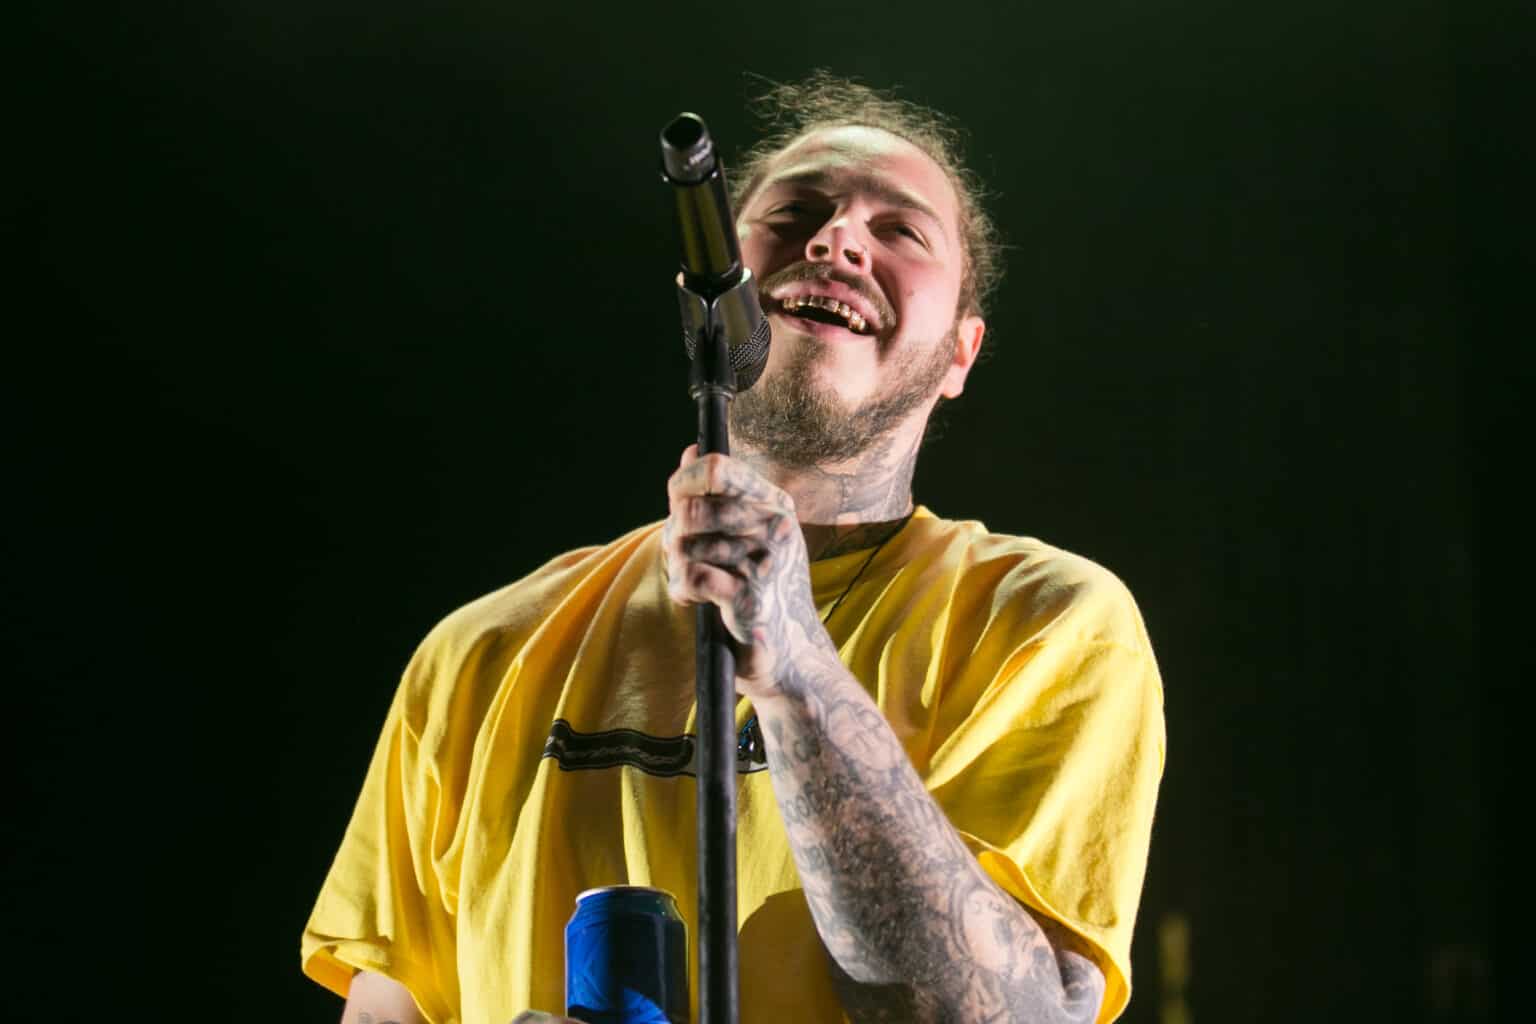 Who Are Post Malone's Parents?